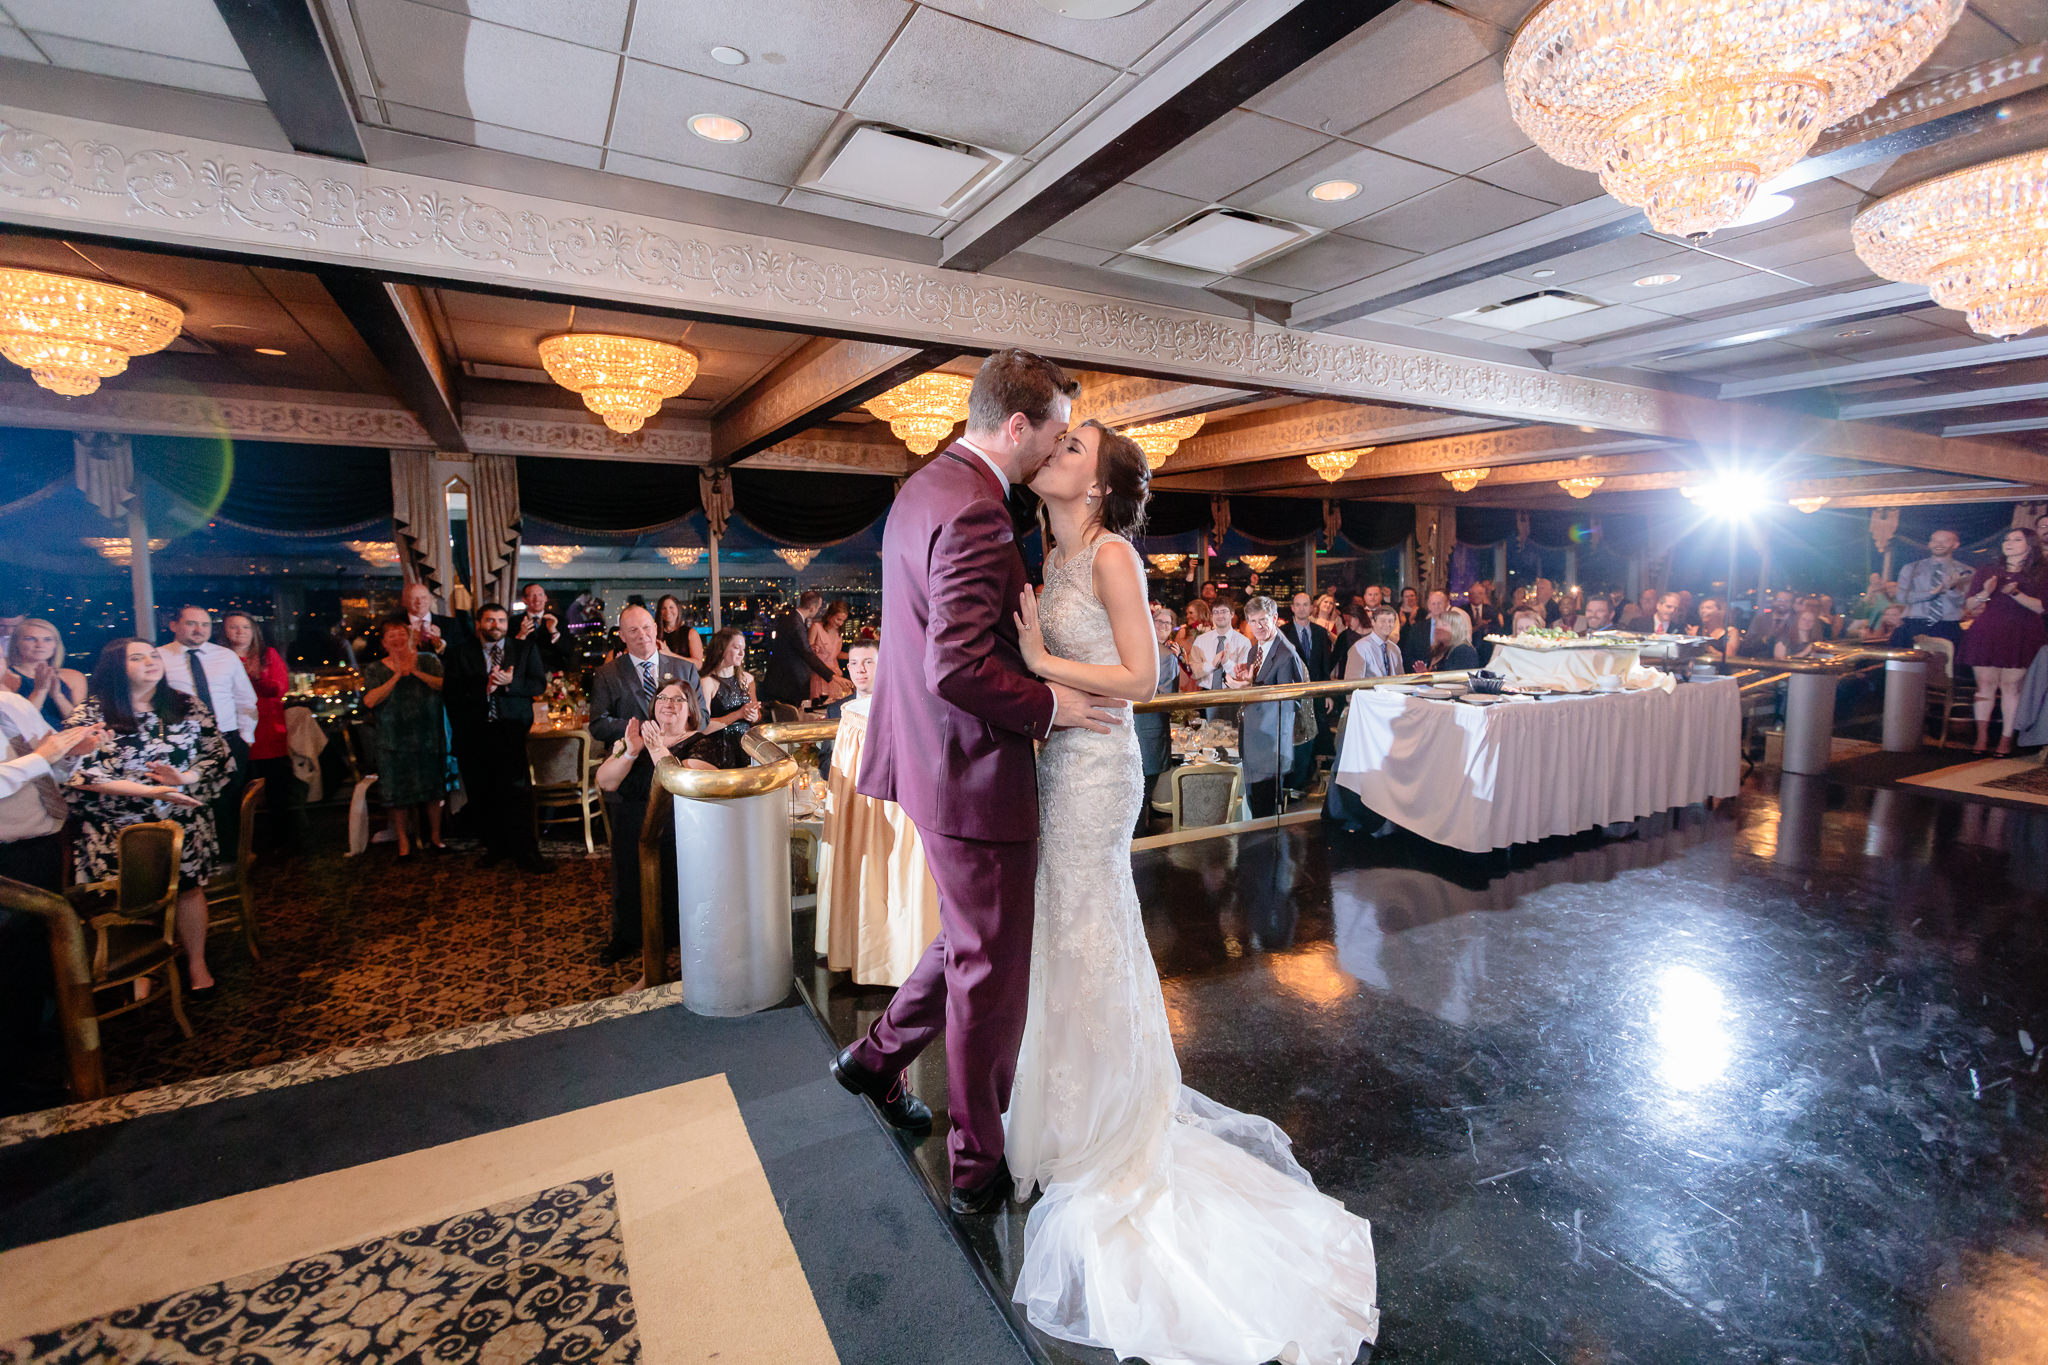 Newlyweds kiss on the dance floor after being introduced at their LeMont wedding